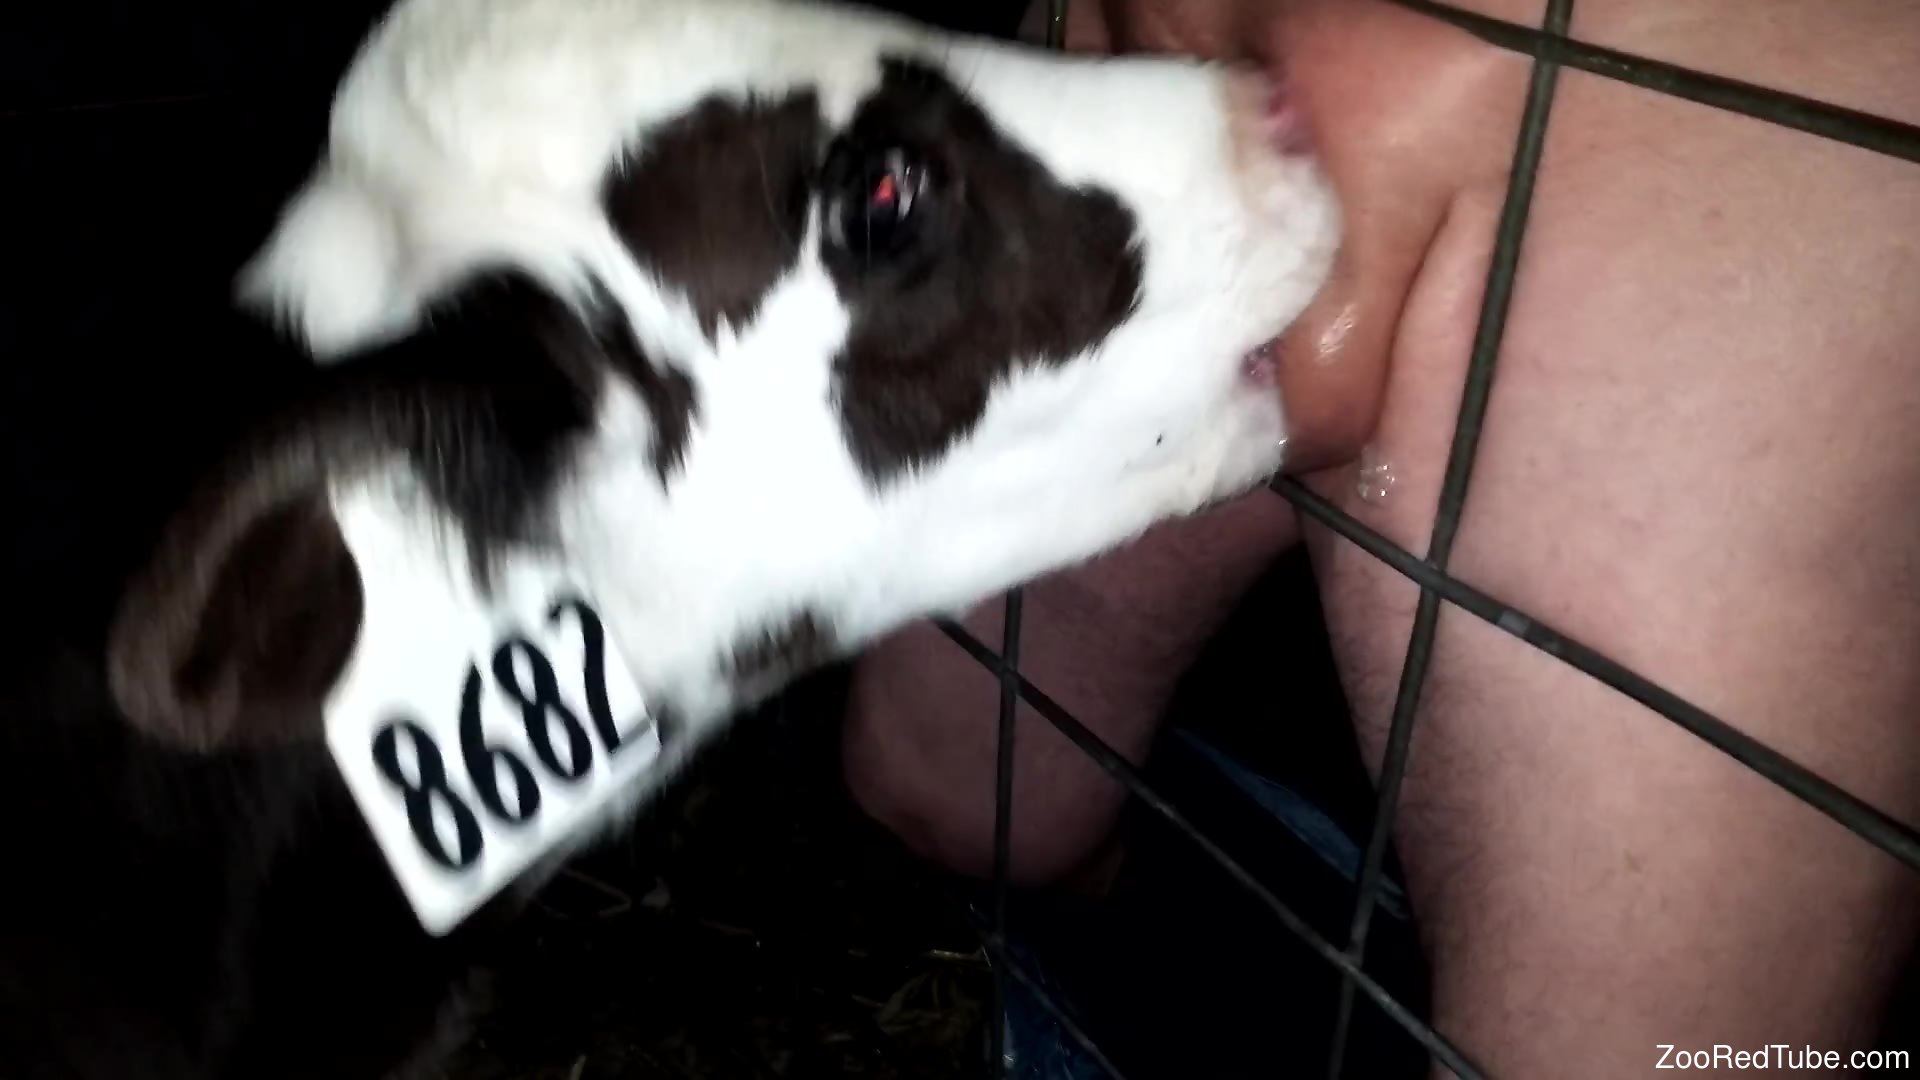 Man sticks his dick through the fence for this baby cow